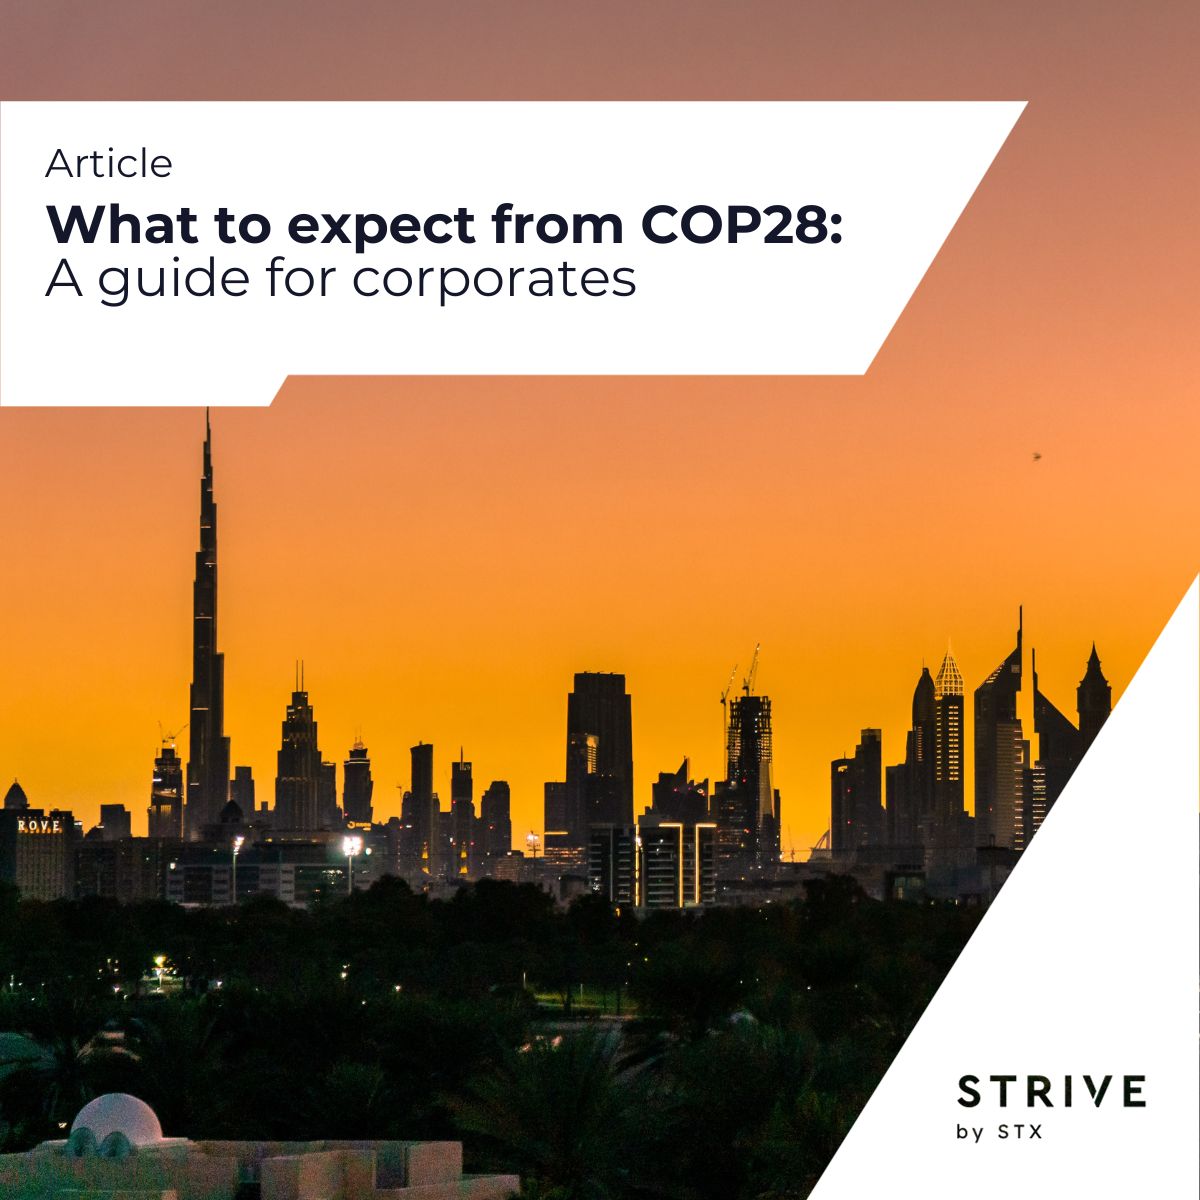 STRIVE by STX on LinkedIn: What to expect from COP28? - STRIVE by STX